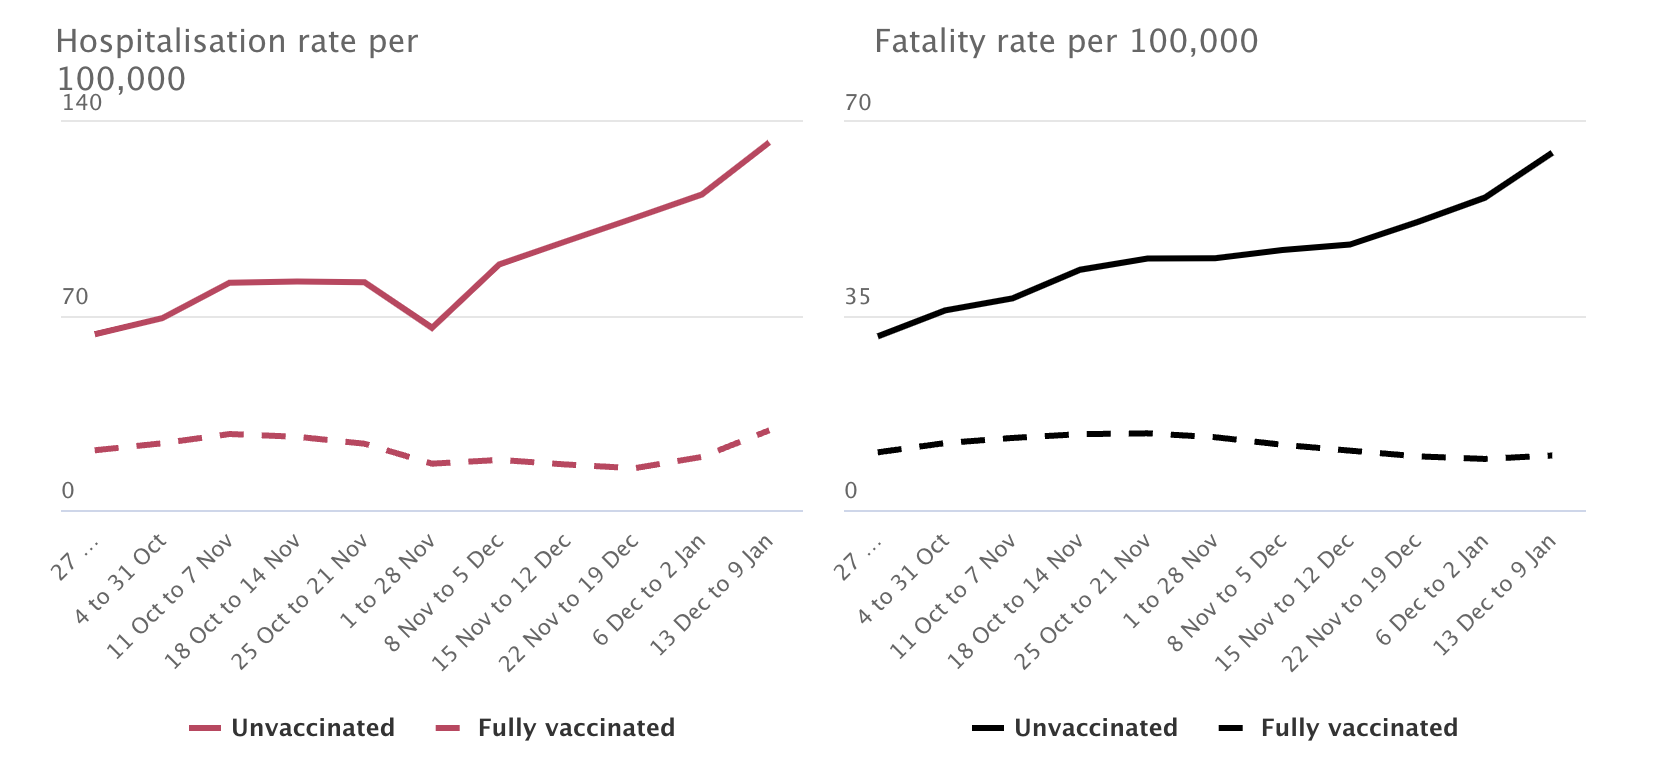 Over-50s in England, hospital admissions (2a) and death (2b) rates per 100,000, split between the unvaccinated and fully vaccinated